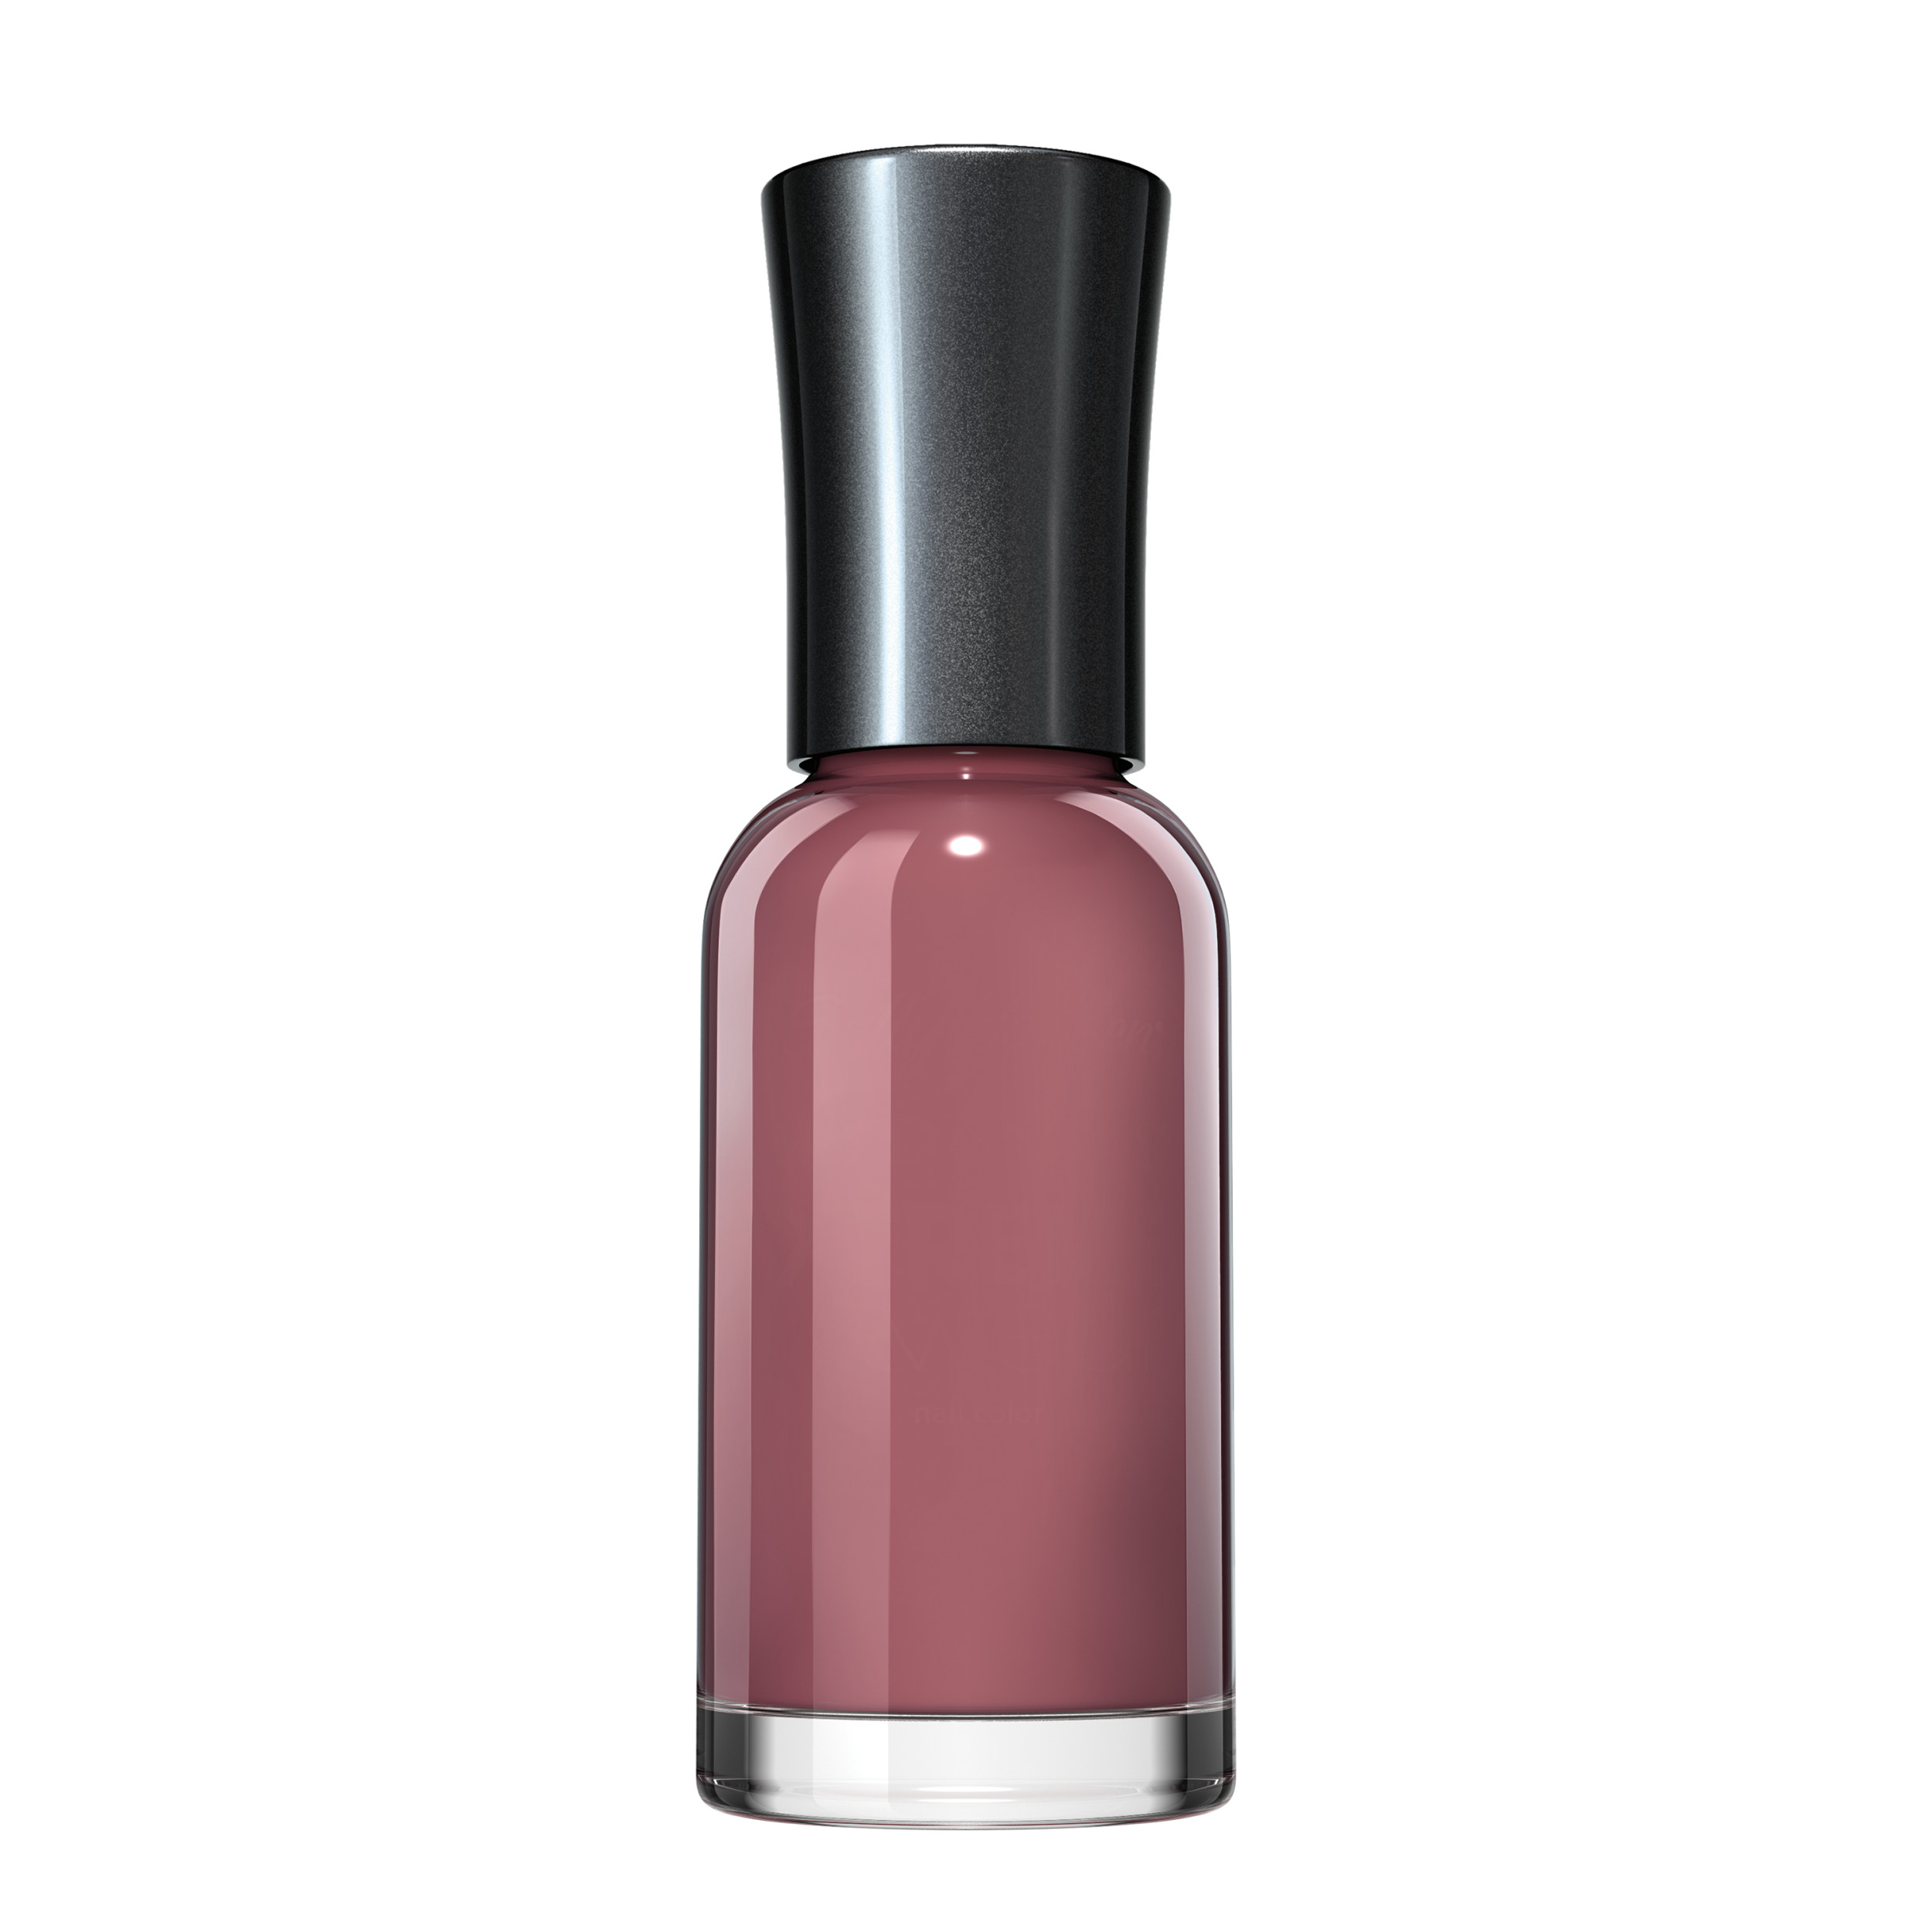 Sally Hansen Xtreme Wear Nail Polish, Mauve Over, 0.4 oz, Chip Resistant, Bold Color - image 9 of 14